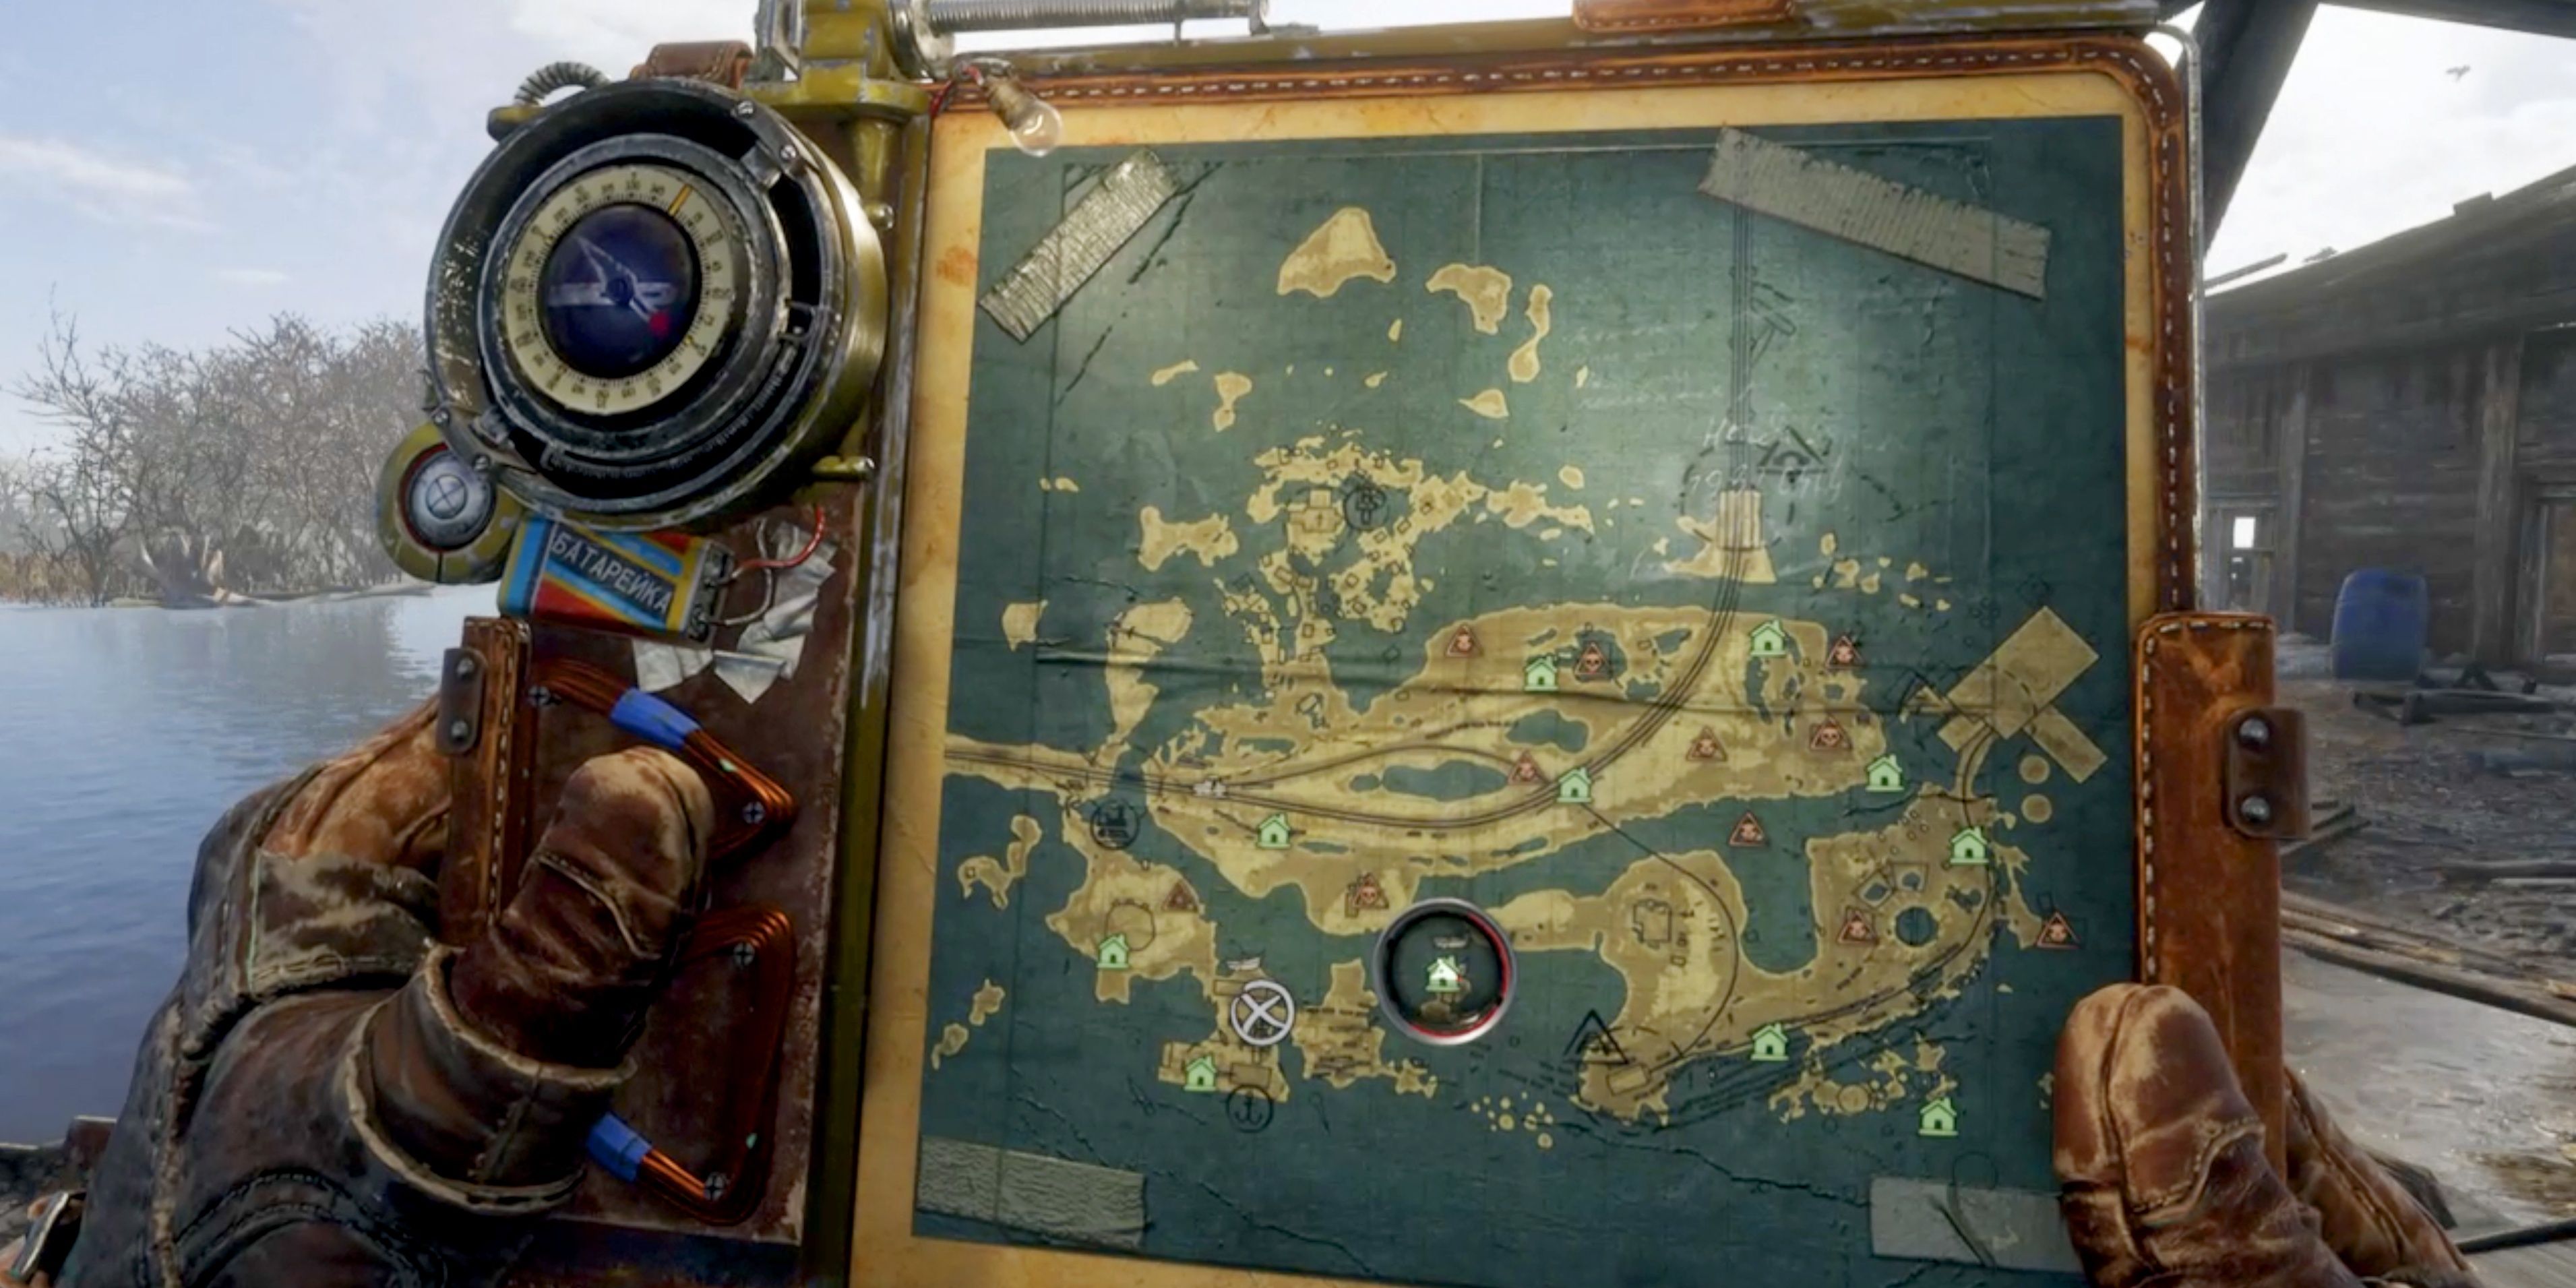 Artyom holding the map of a region with various discovered locations